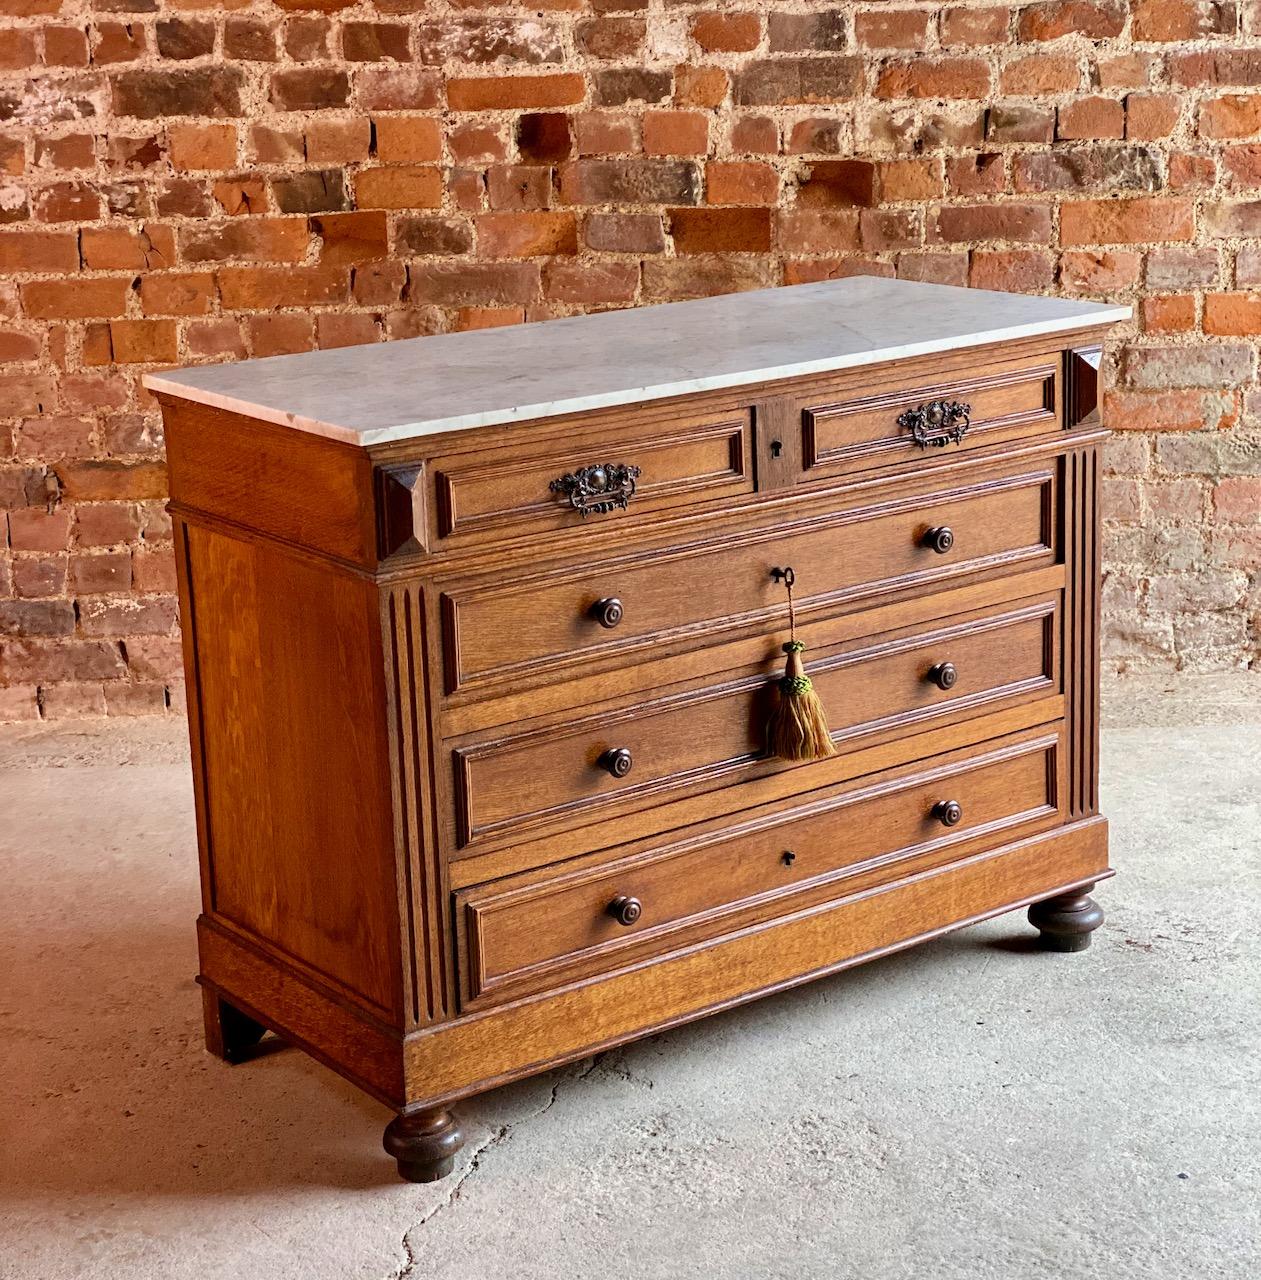 Antique French oak marble commode chest of drawers, France, circa 1890

A fabulous antique French Napoleon III oak marble topped commode chest of drawers, circa 1890, this chest dates to the late 19th century from the French Parisian Napoleon III